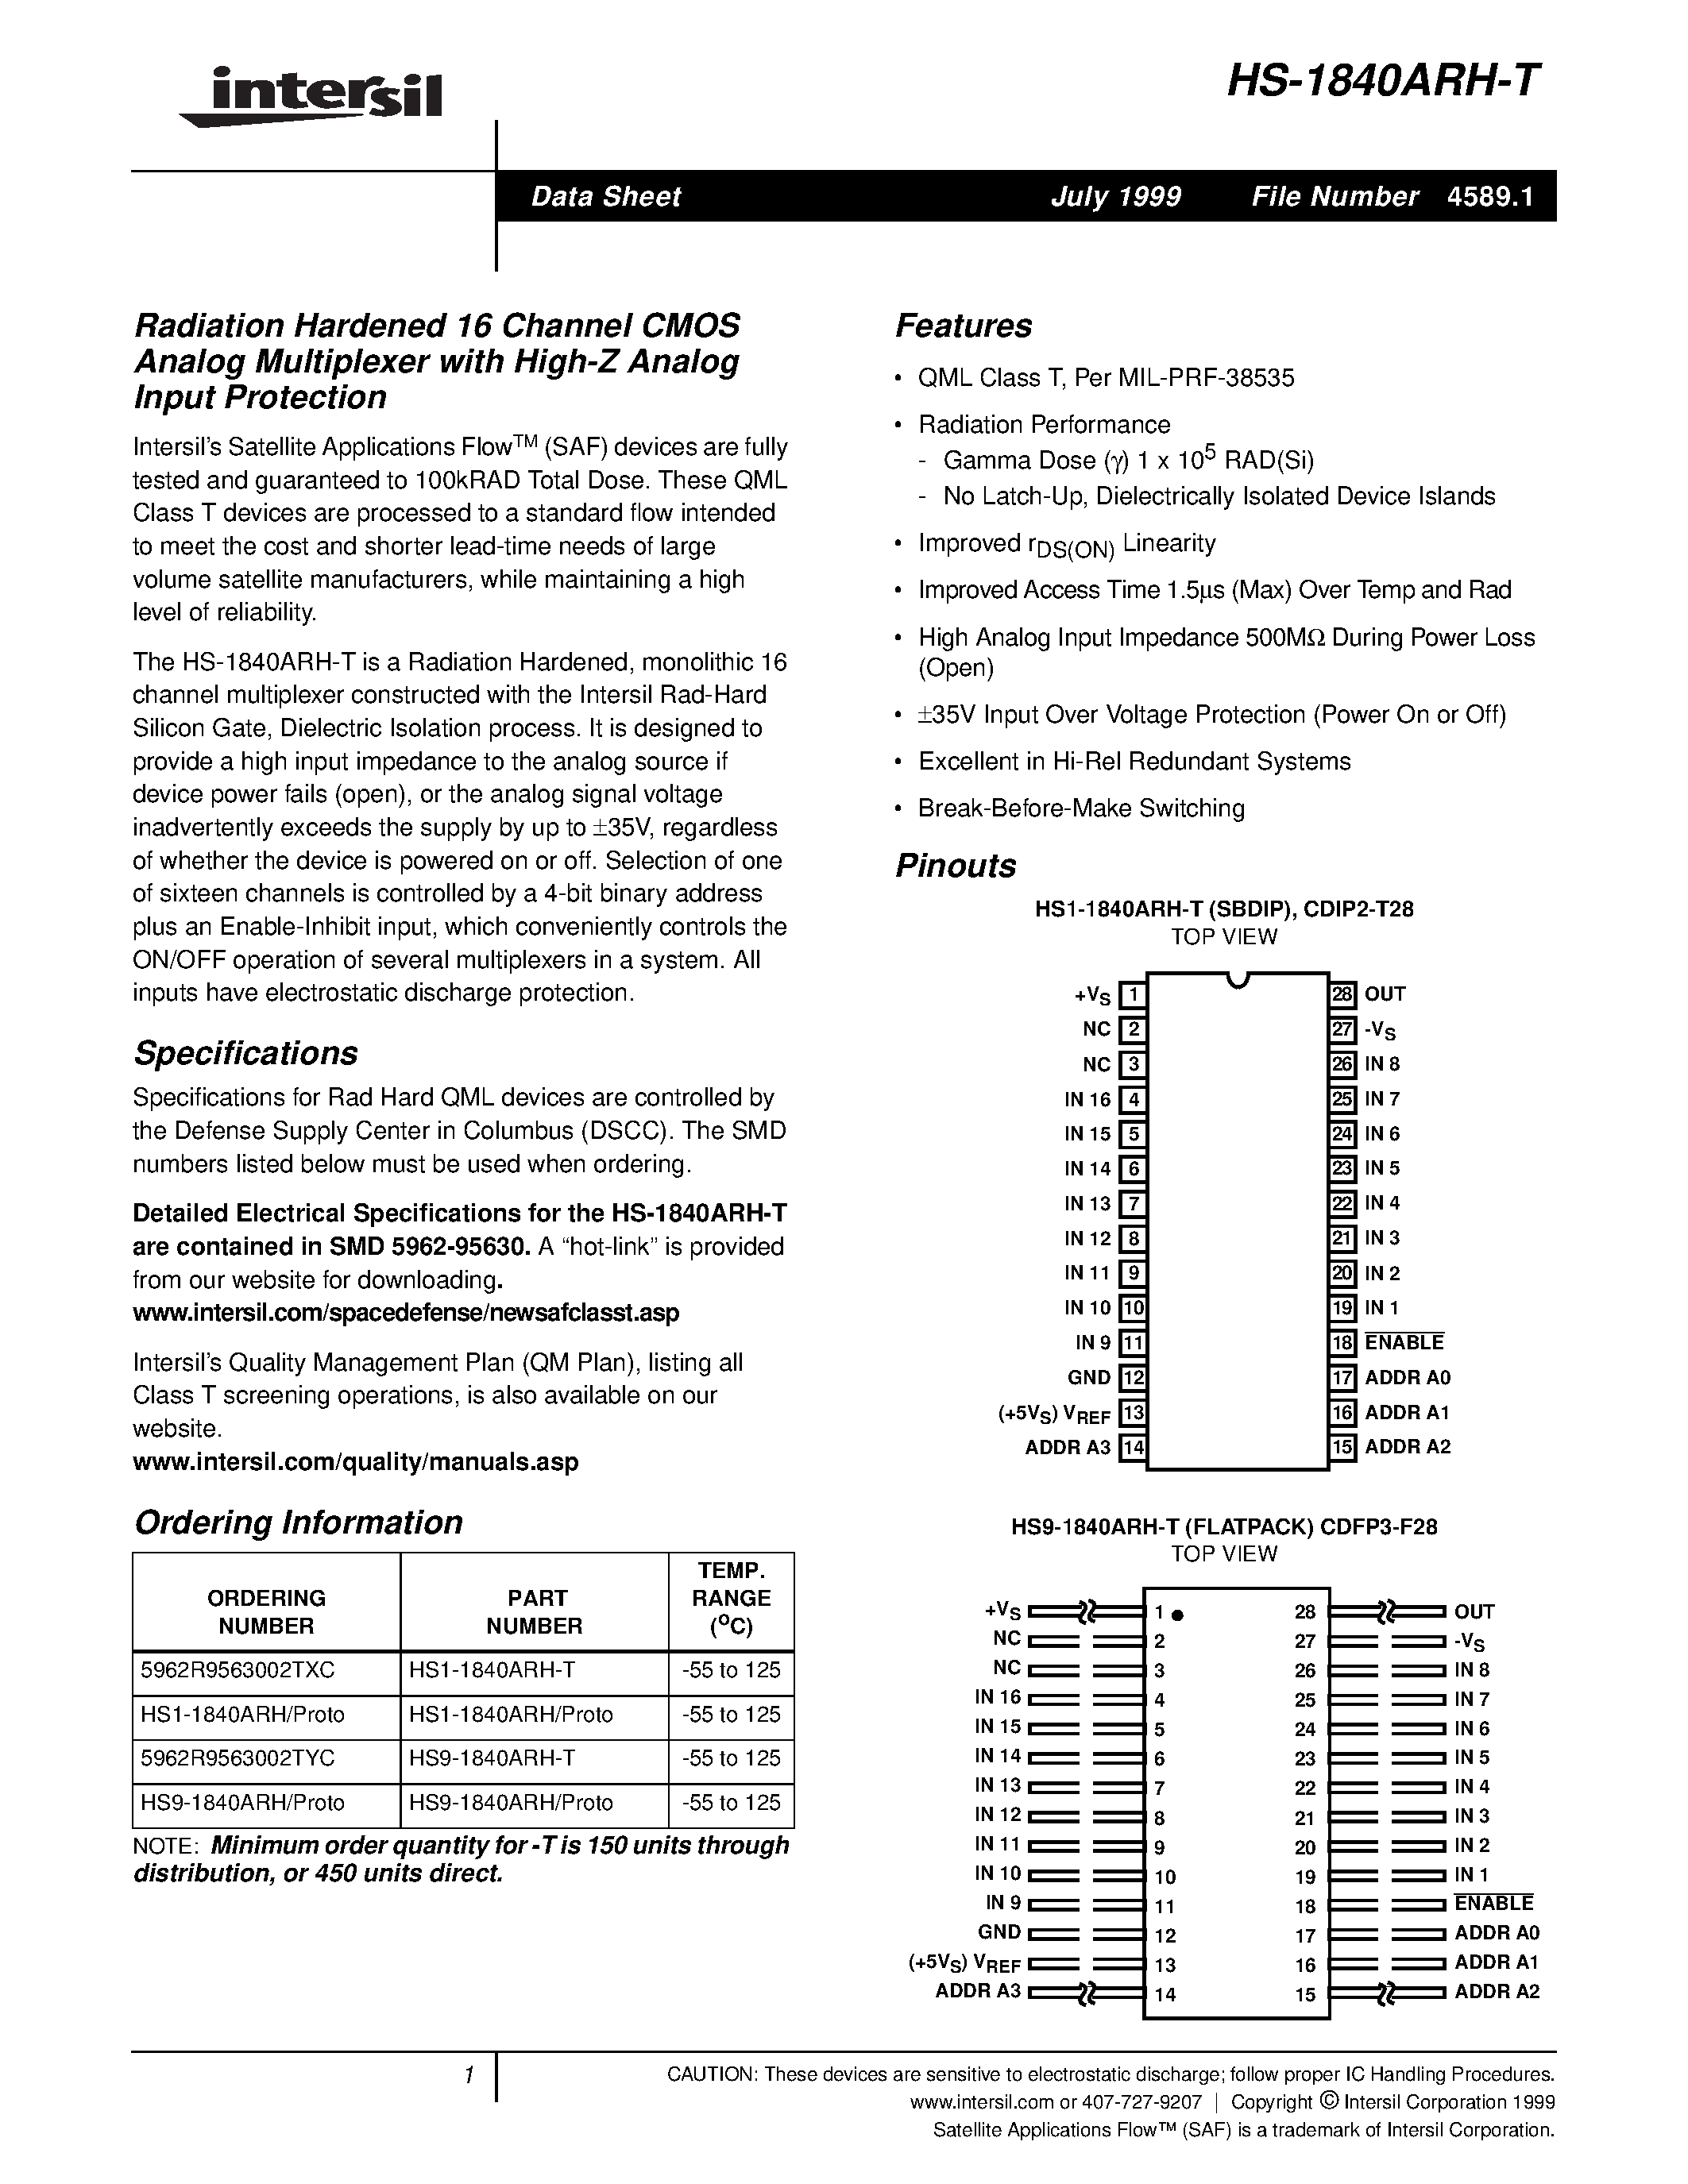 Datasheet HS1-1840ARH-T - Radiation Hardened 16 Channel CMOS Analog Multiplexer with High-Z Analog Input Protection page 1